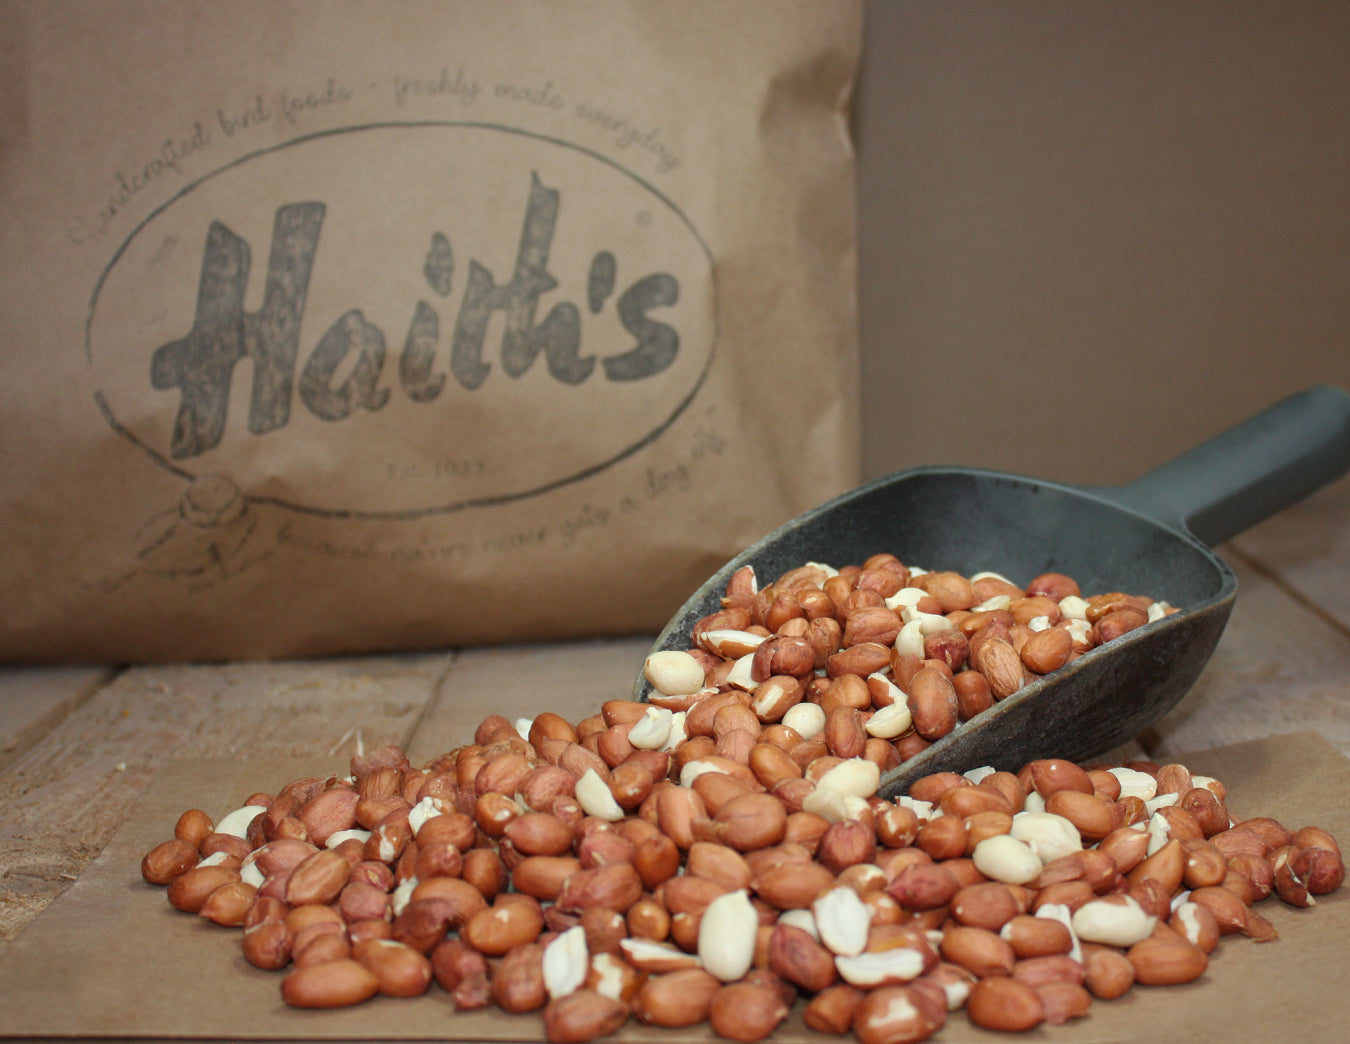 Haith's high quality peanuts for garden birds and wildlife make great bird food and fit neatly and safely into a peanut bird feeder. 